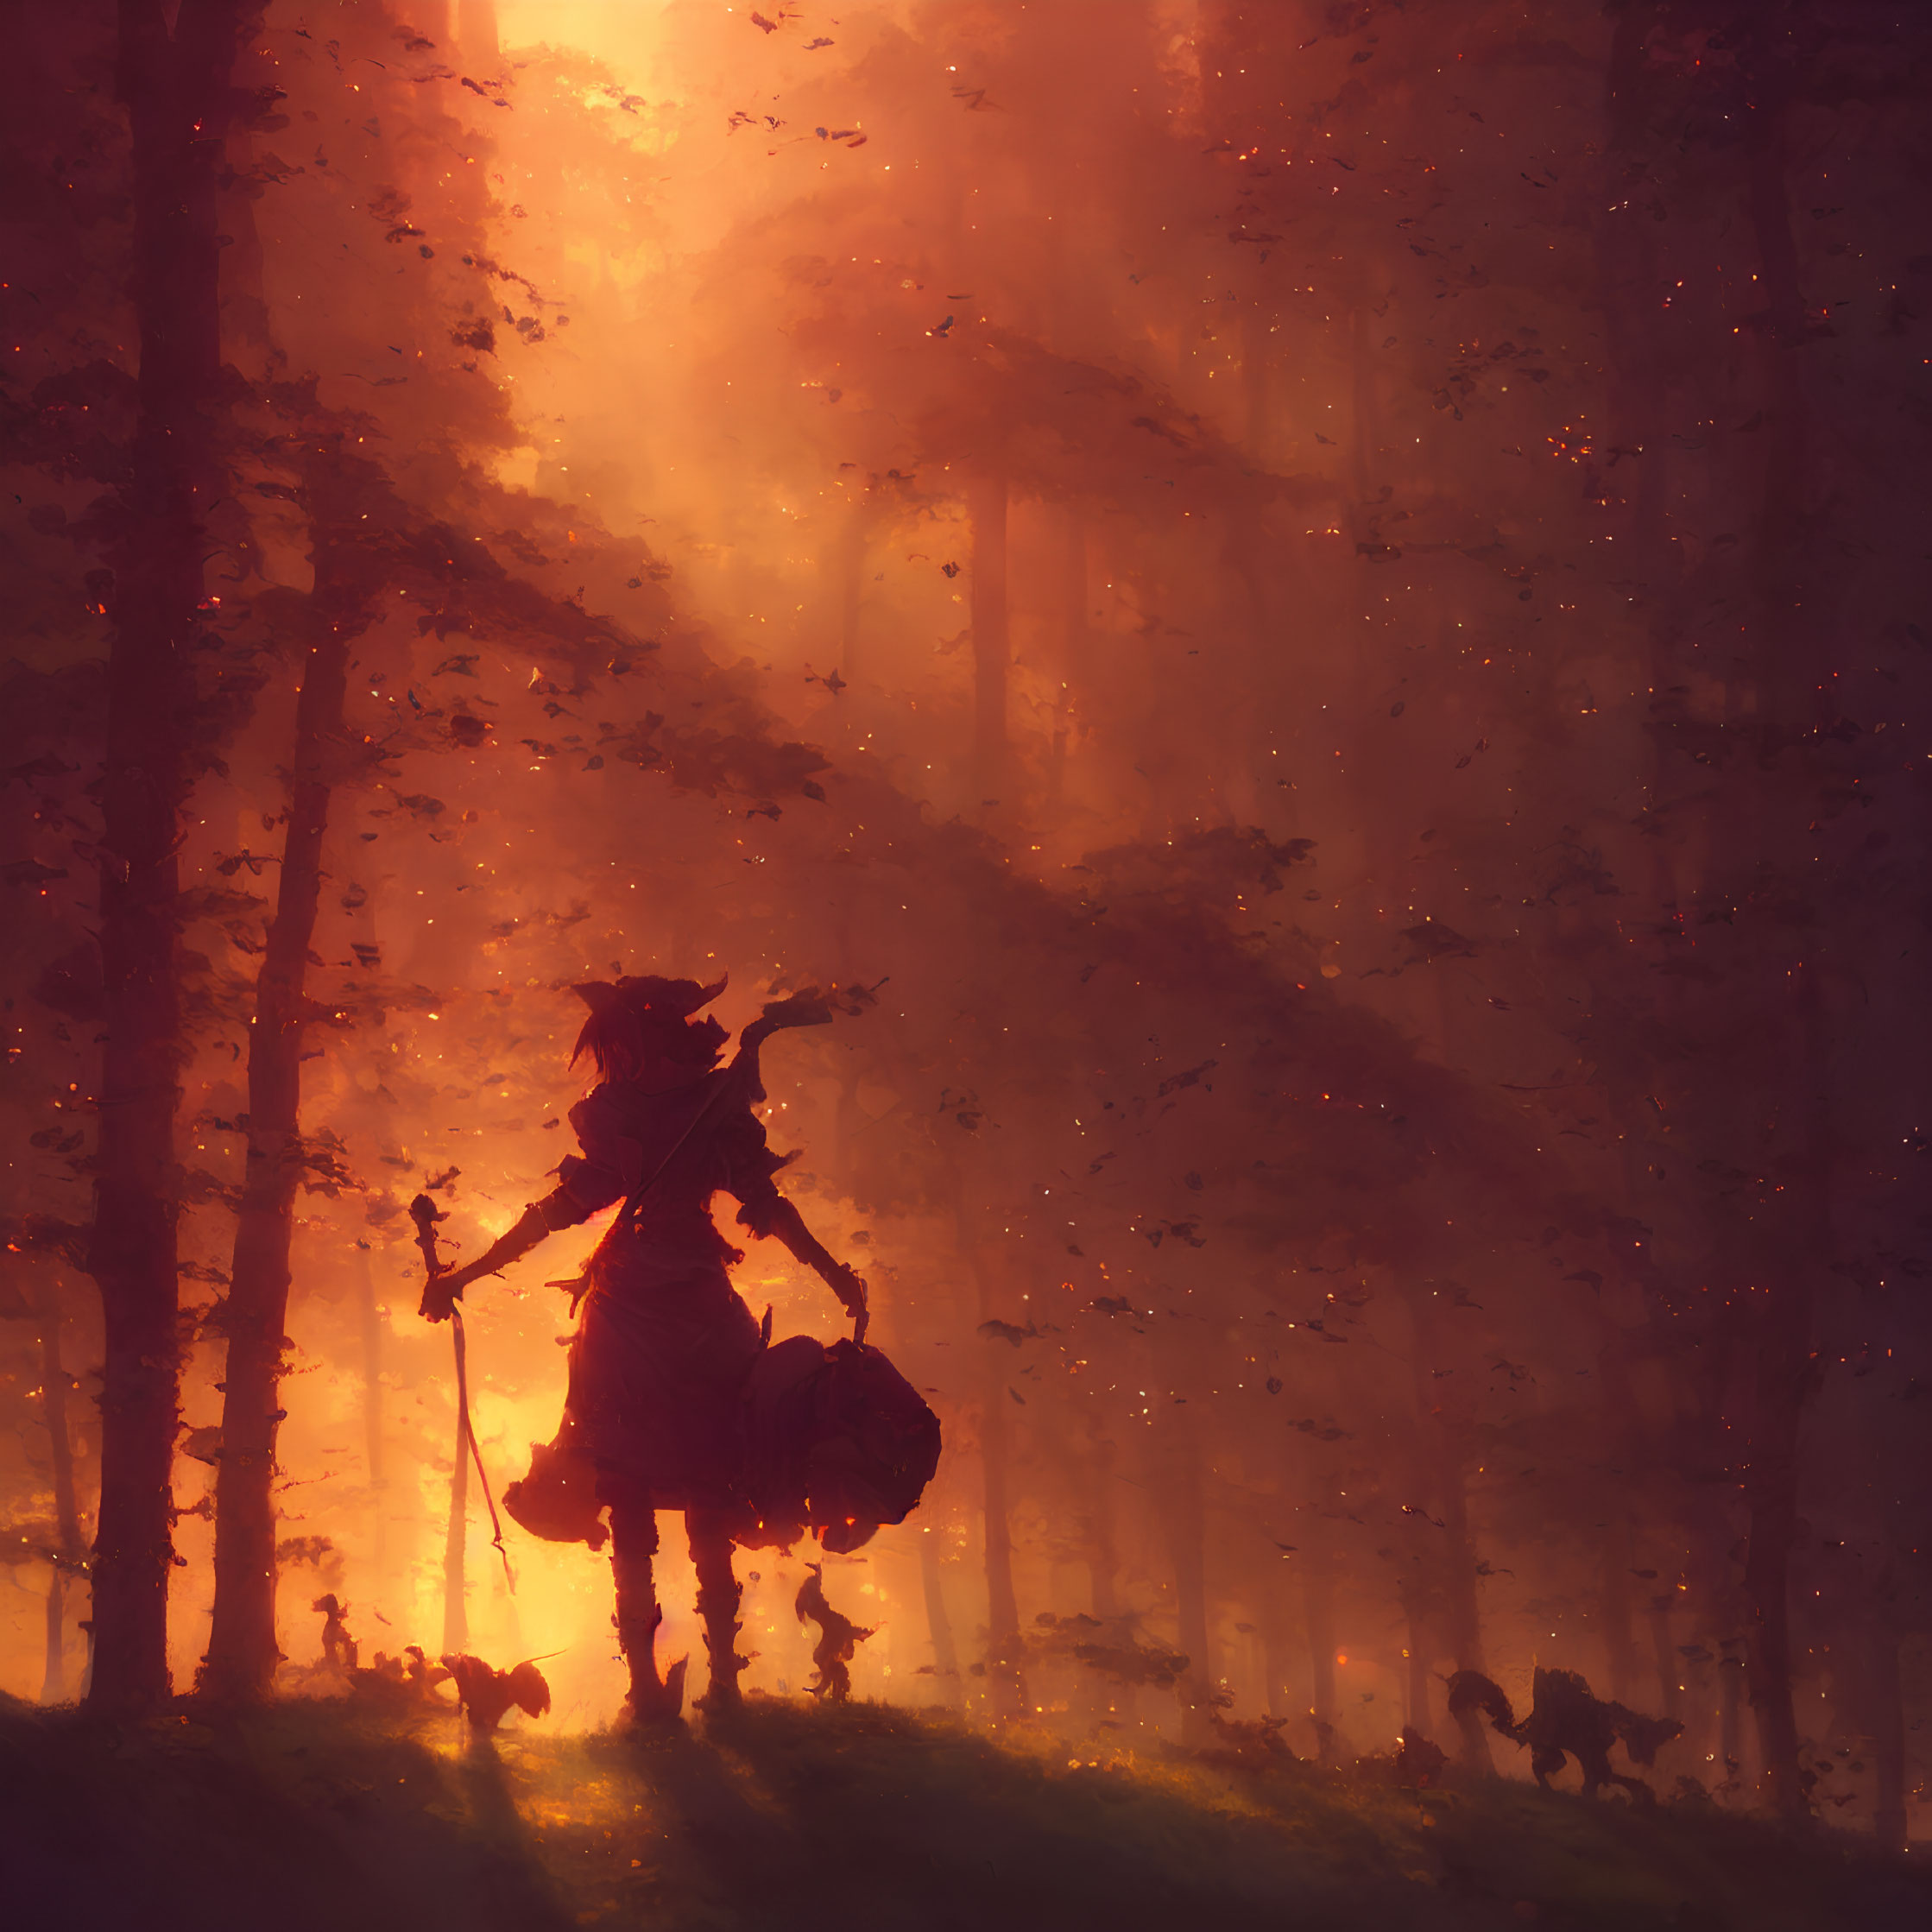 Silhouetted figure with staff and dog in warm forest sunlight